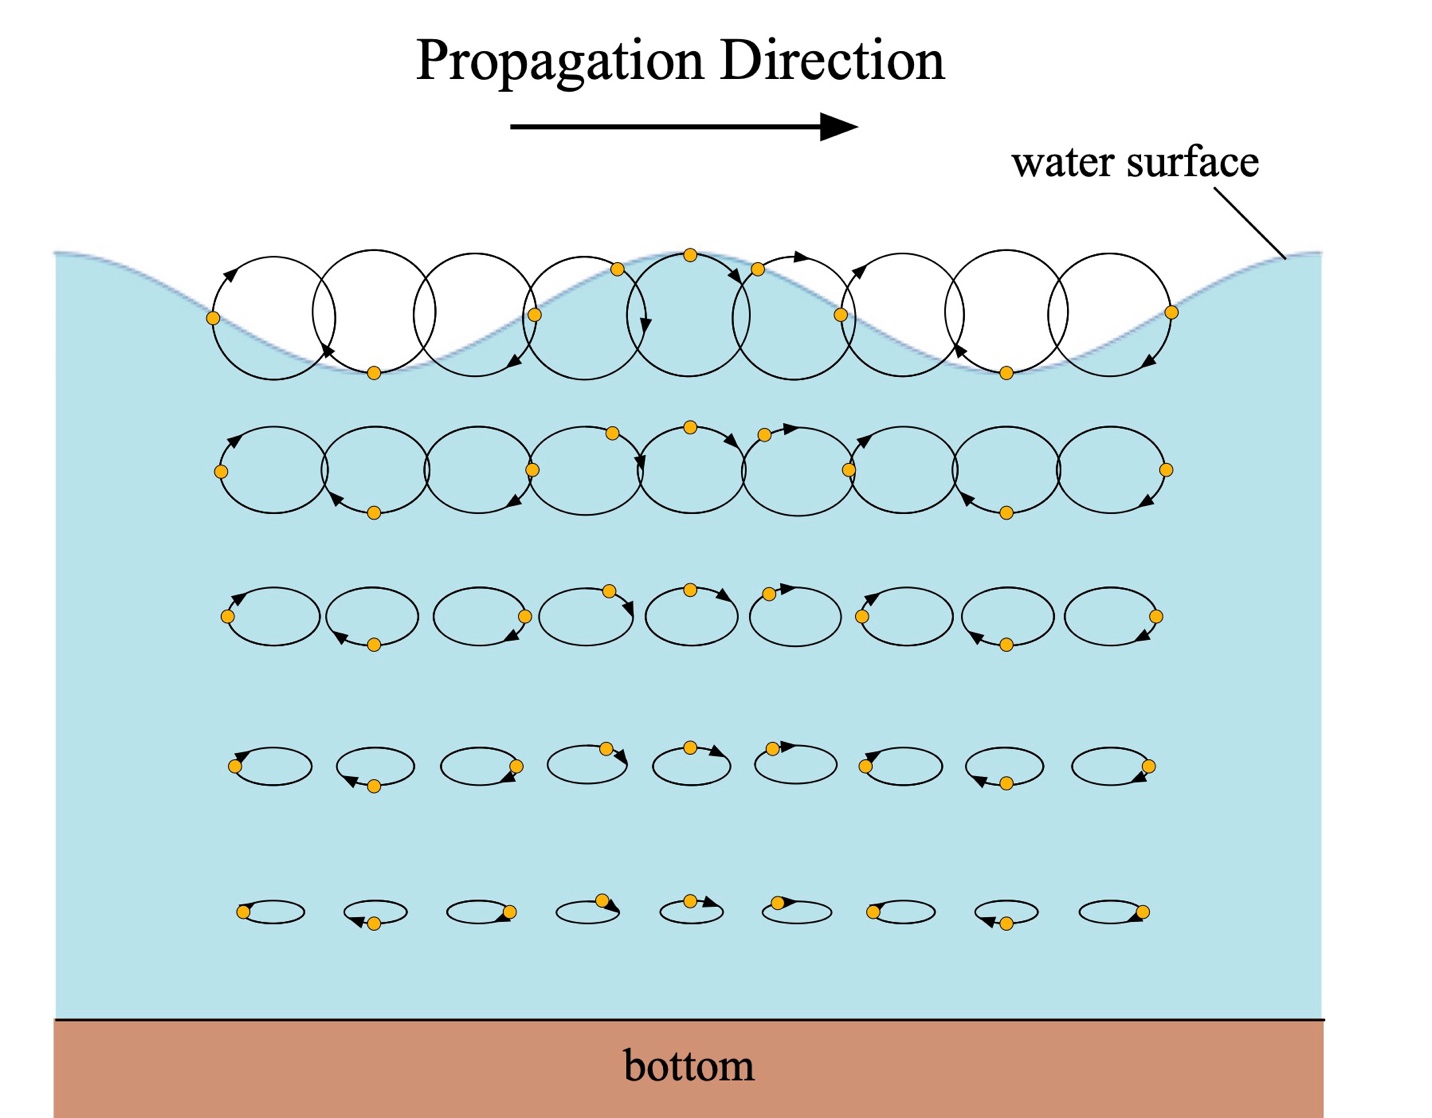 Diagram of water surface and water surface

Description automatically generated with low confidence